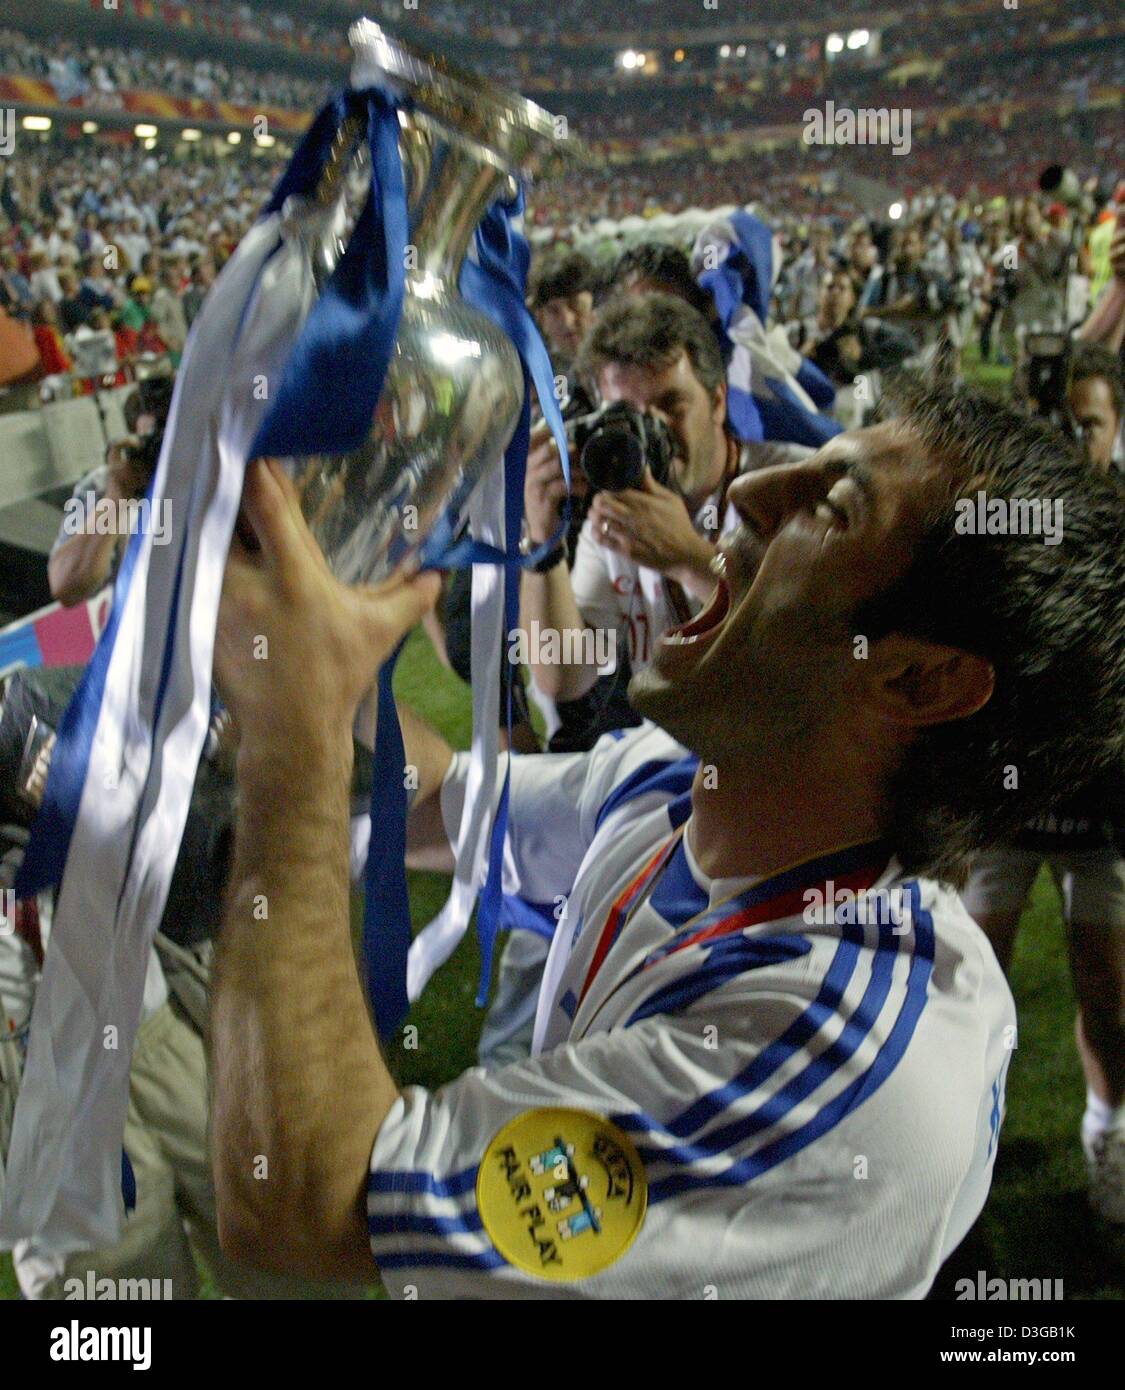 (dpa) - Greek midfielder Georgios Karagounis is surrounded by photographers as he holds up the trophy which is draped with the Greek colours after the Euro 2004 soccer final between Portugal and Greece at Luz Stadium in Lisbon, Portugal, 4 July 2004. Greece, which had never before won a European Championship or World Cup match, wrote footballing history with their memorable 1-0 vic Stock Photo